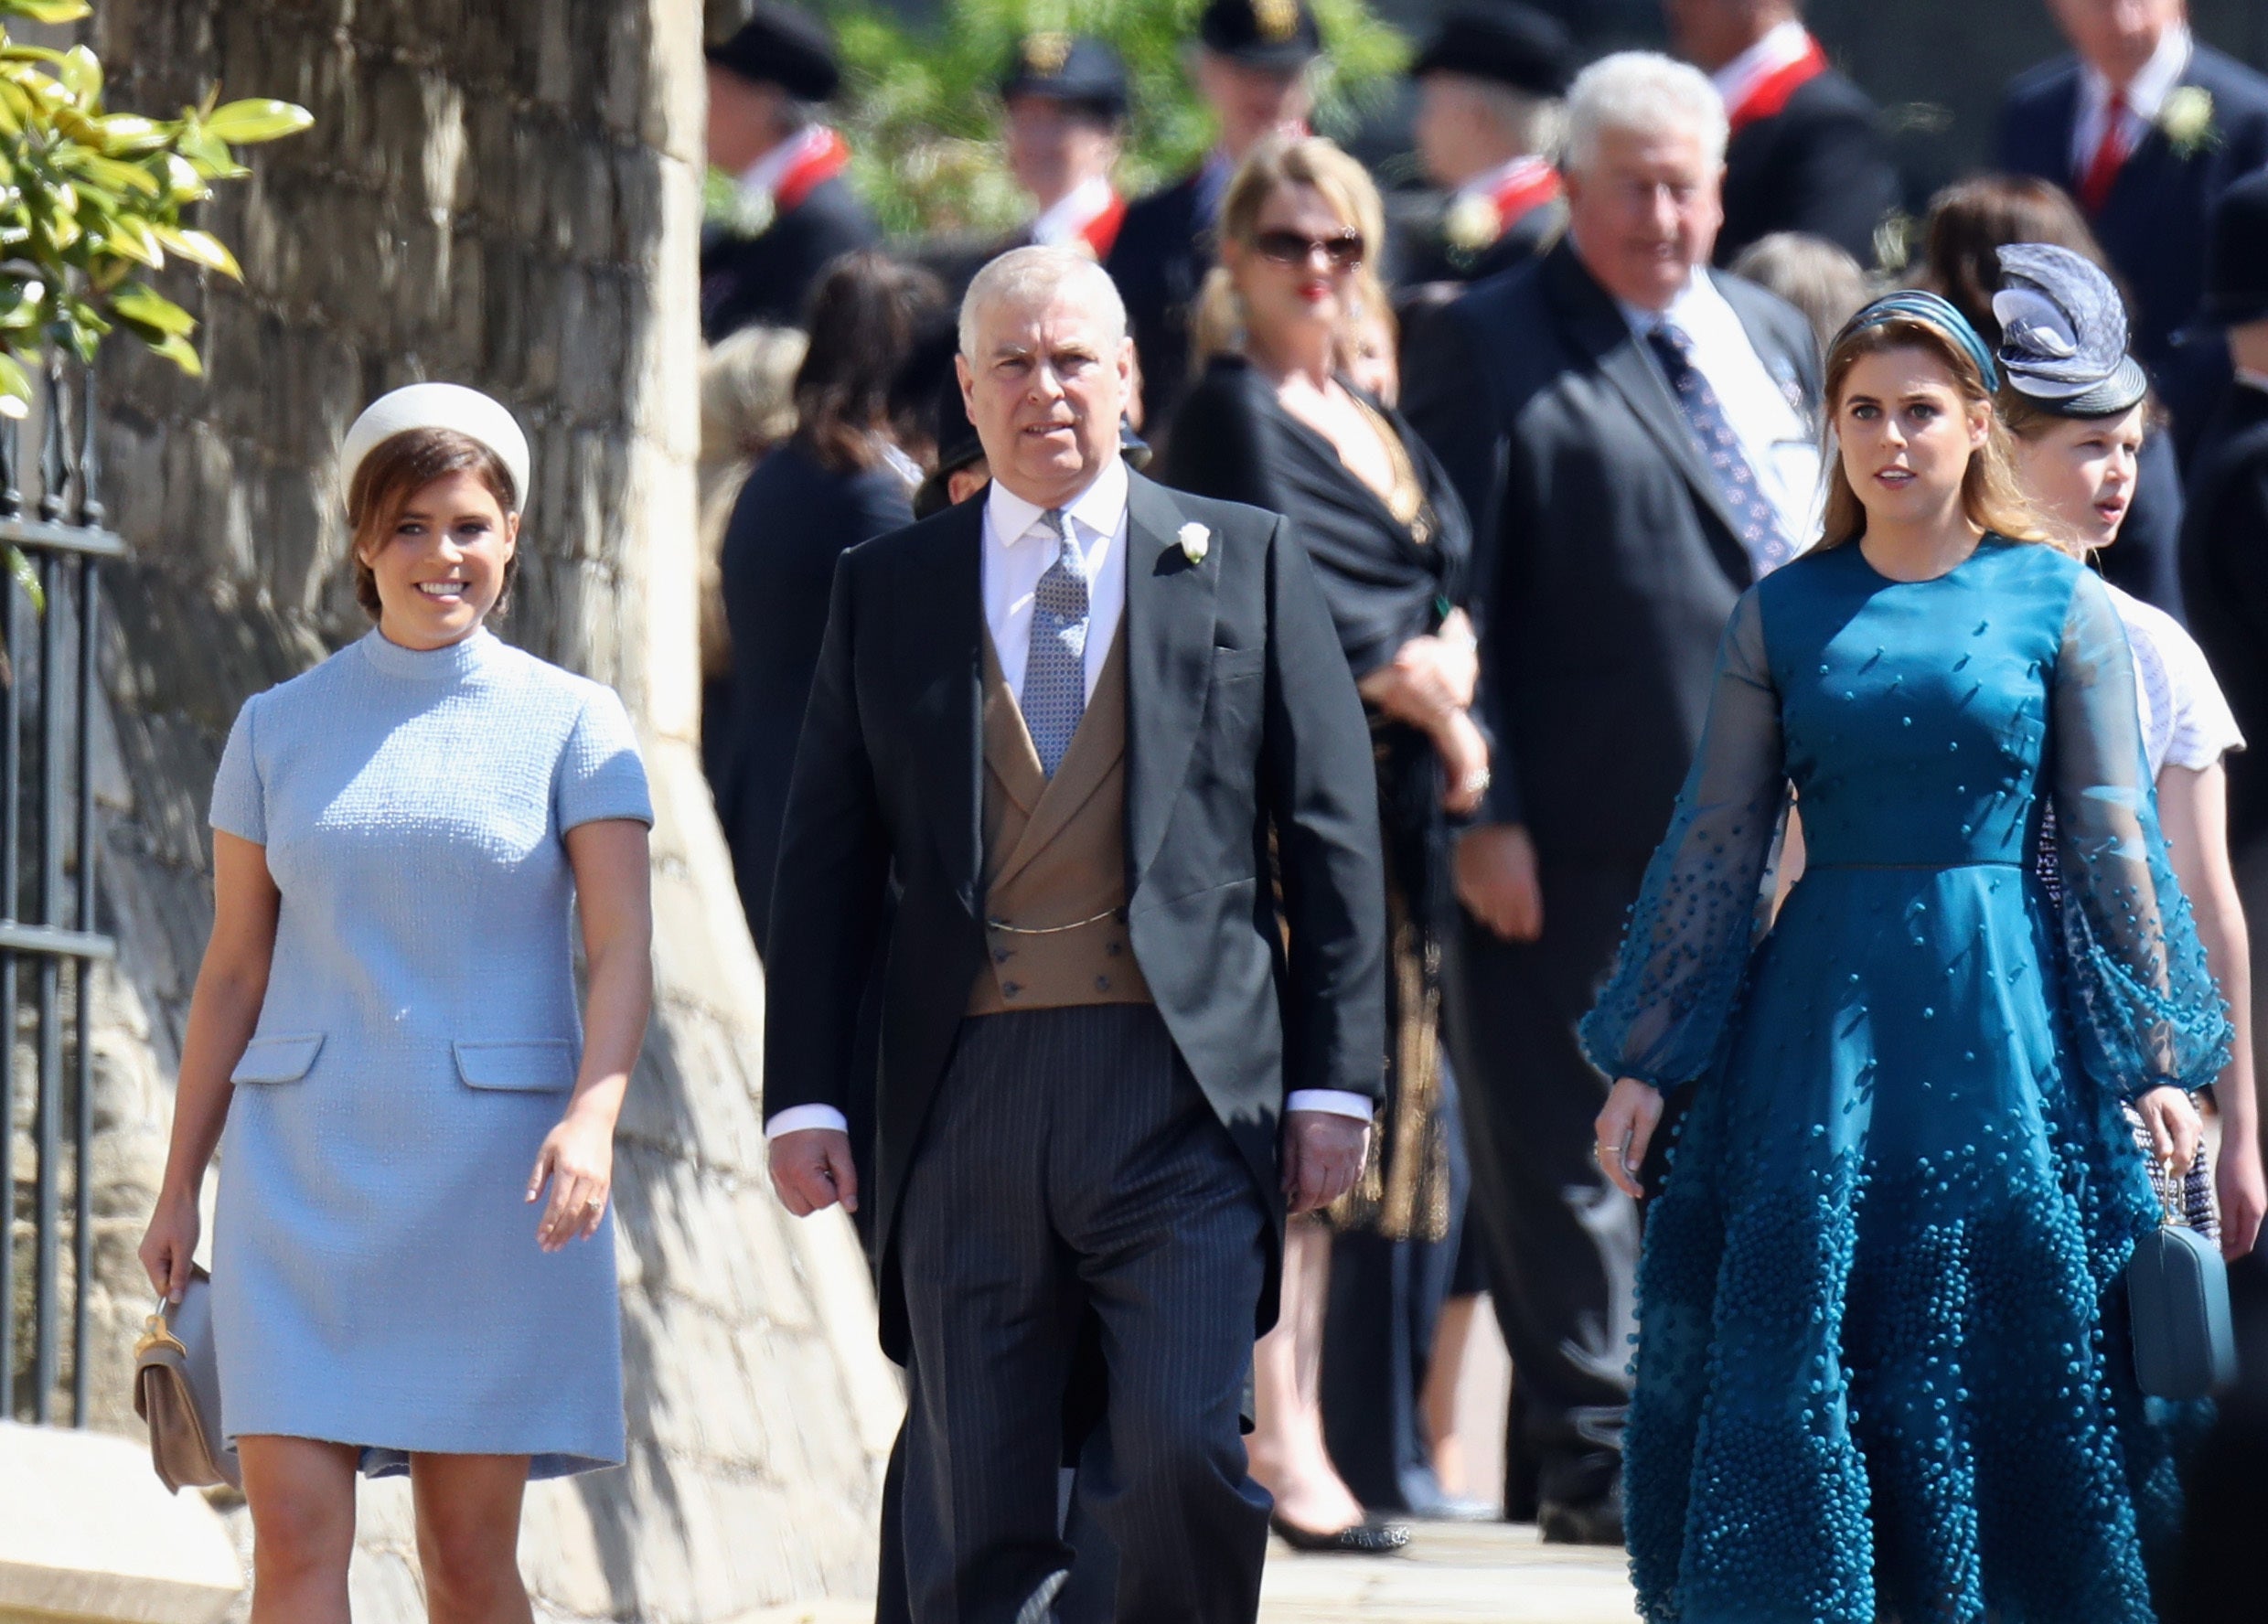 The duke has been supported by his daughters, Eugenie and Beatrice (Chris Jackson/PA)